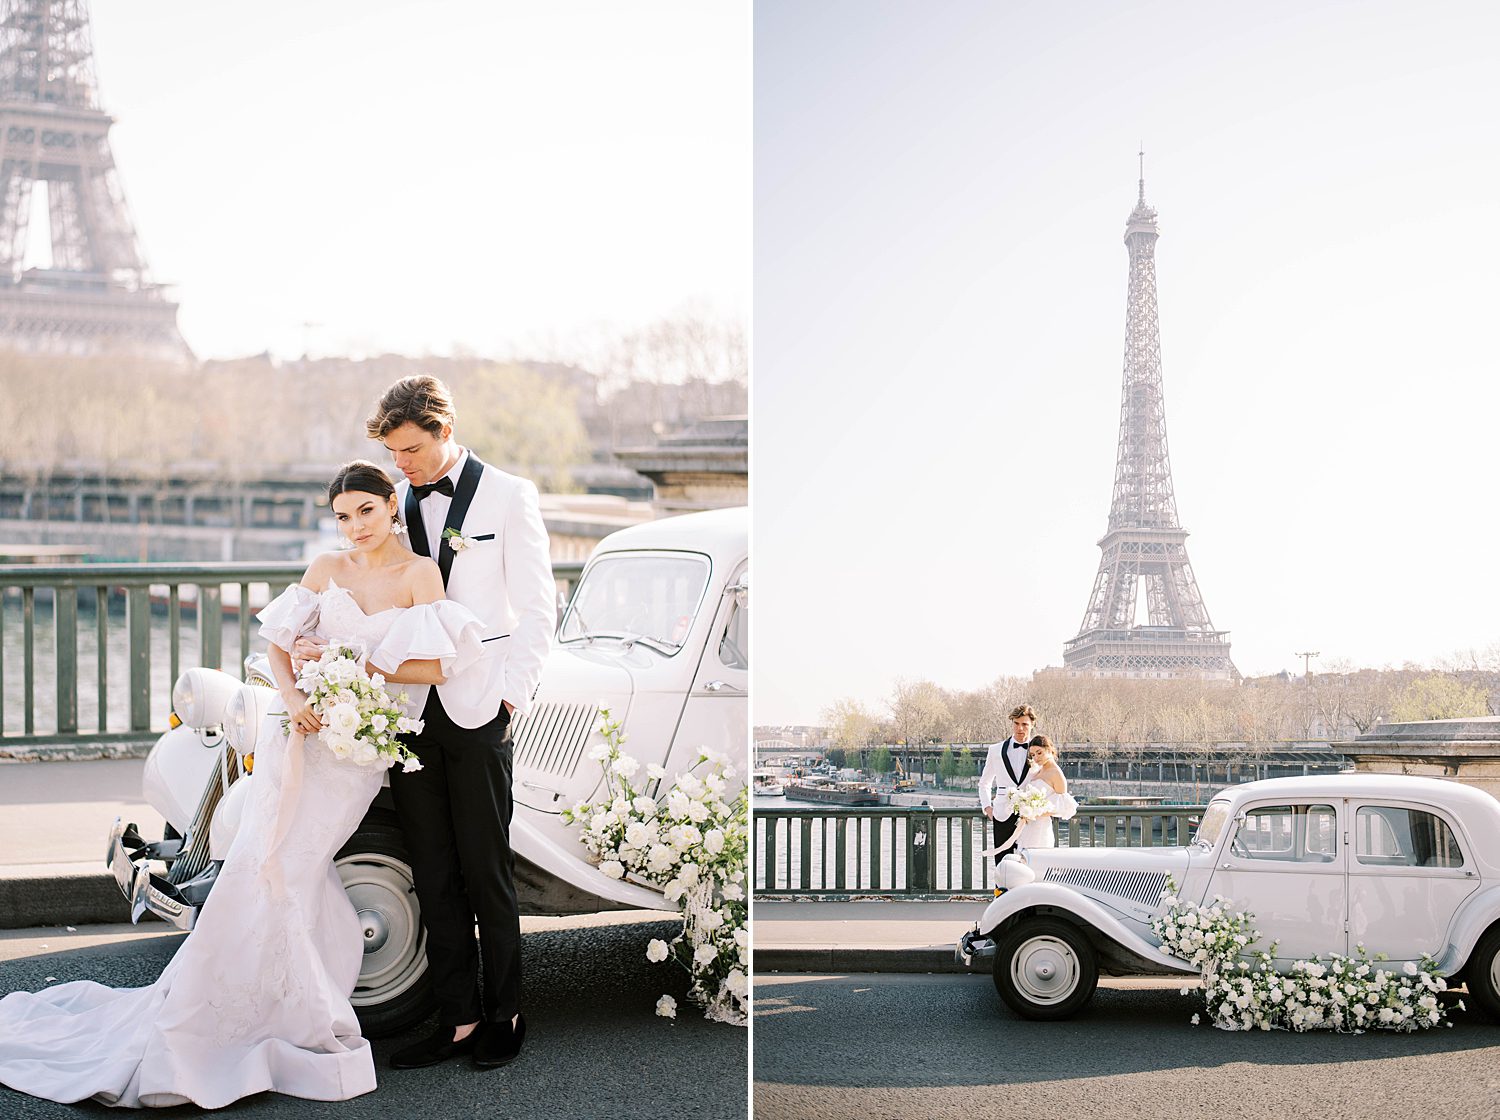 newlyweds lean against classic car in front of Eiffel Tower